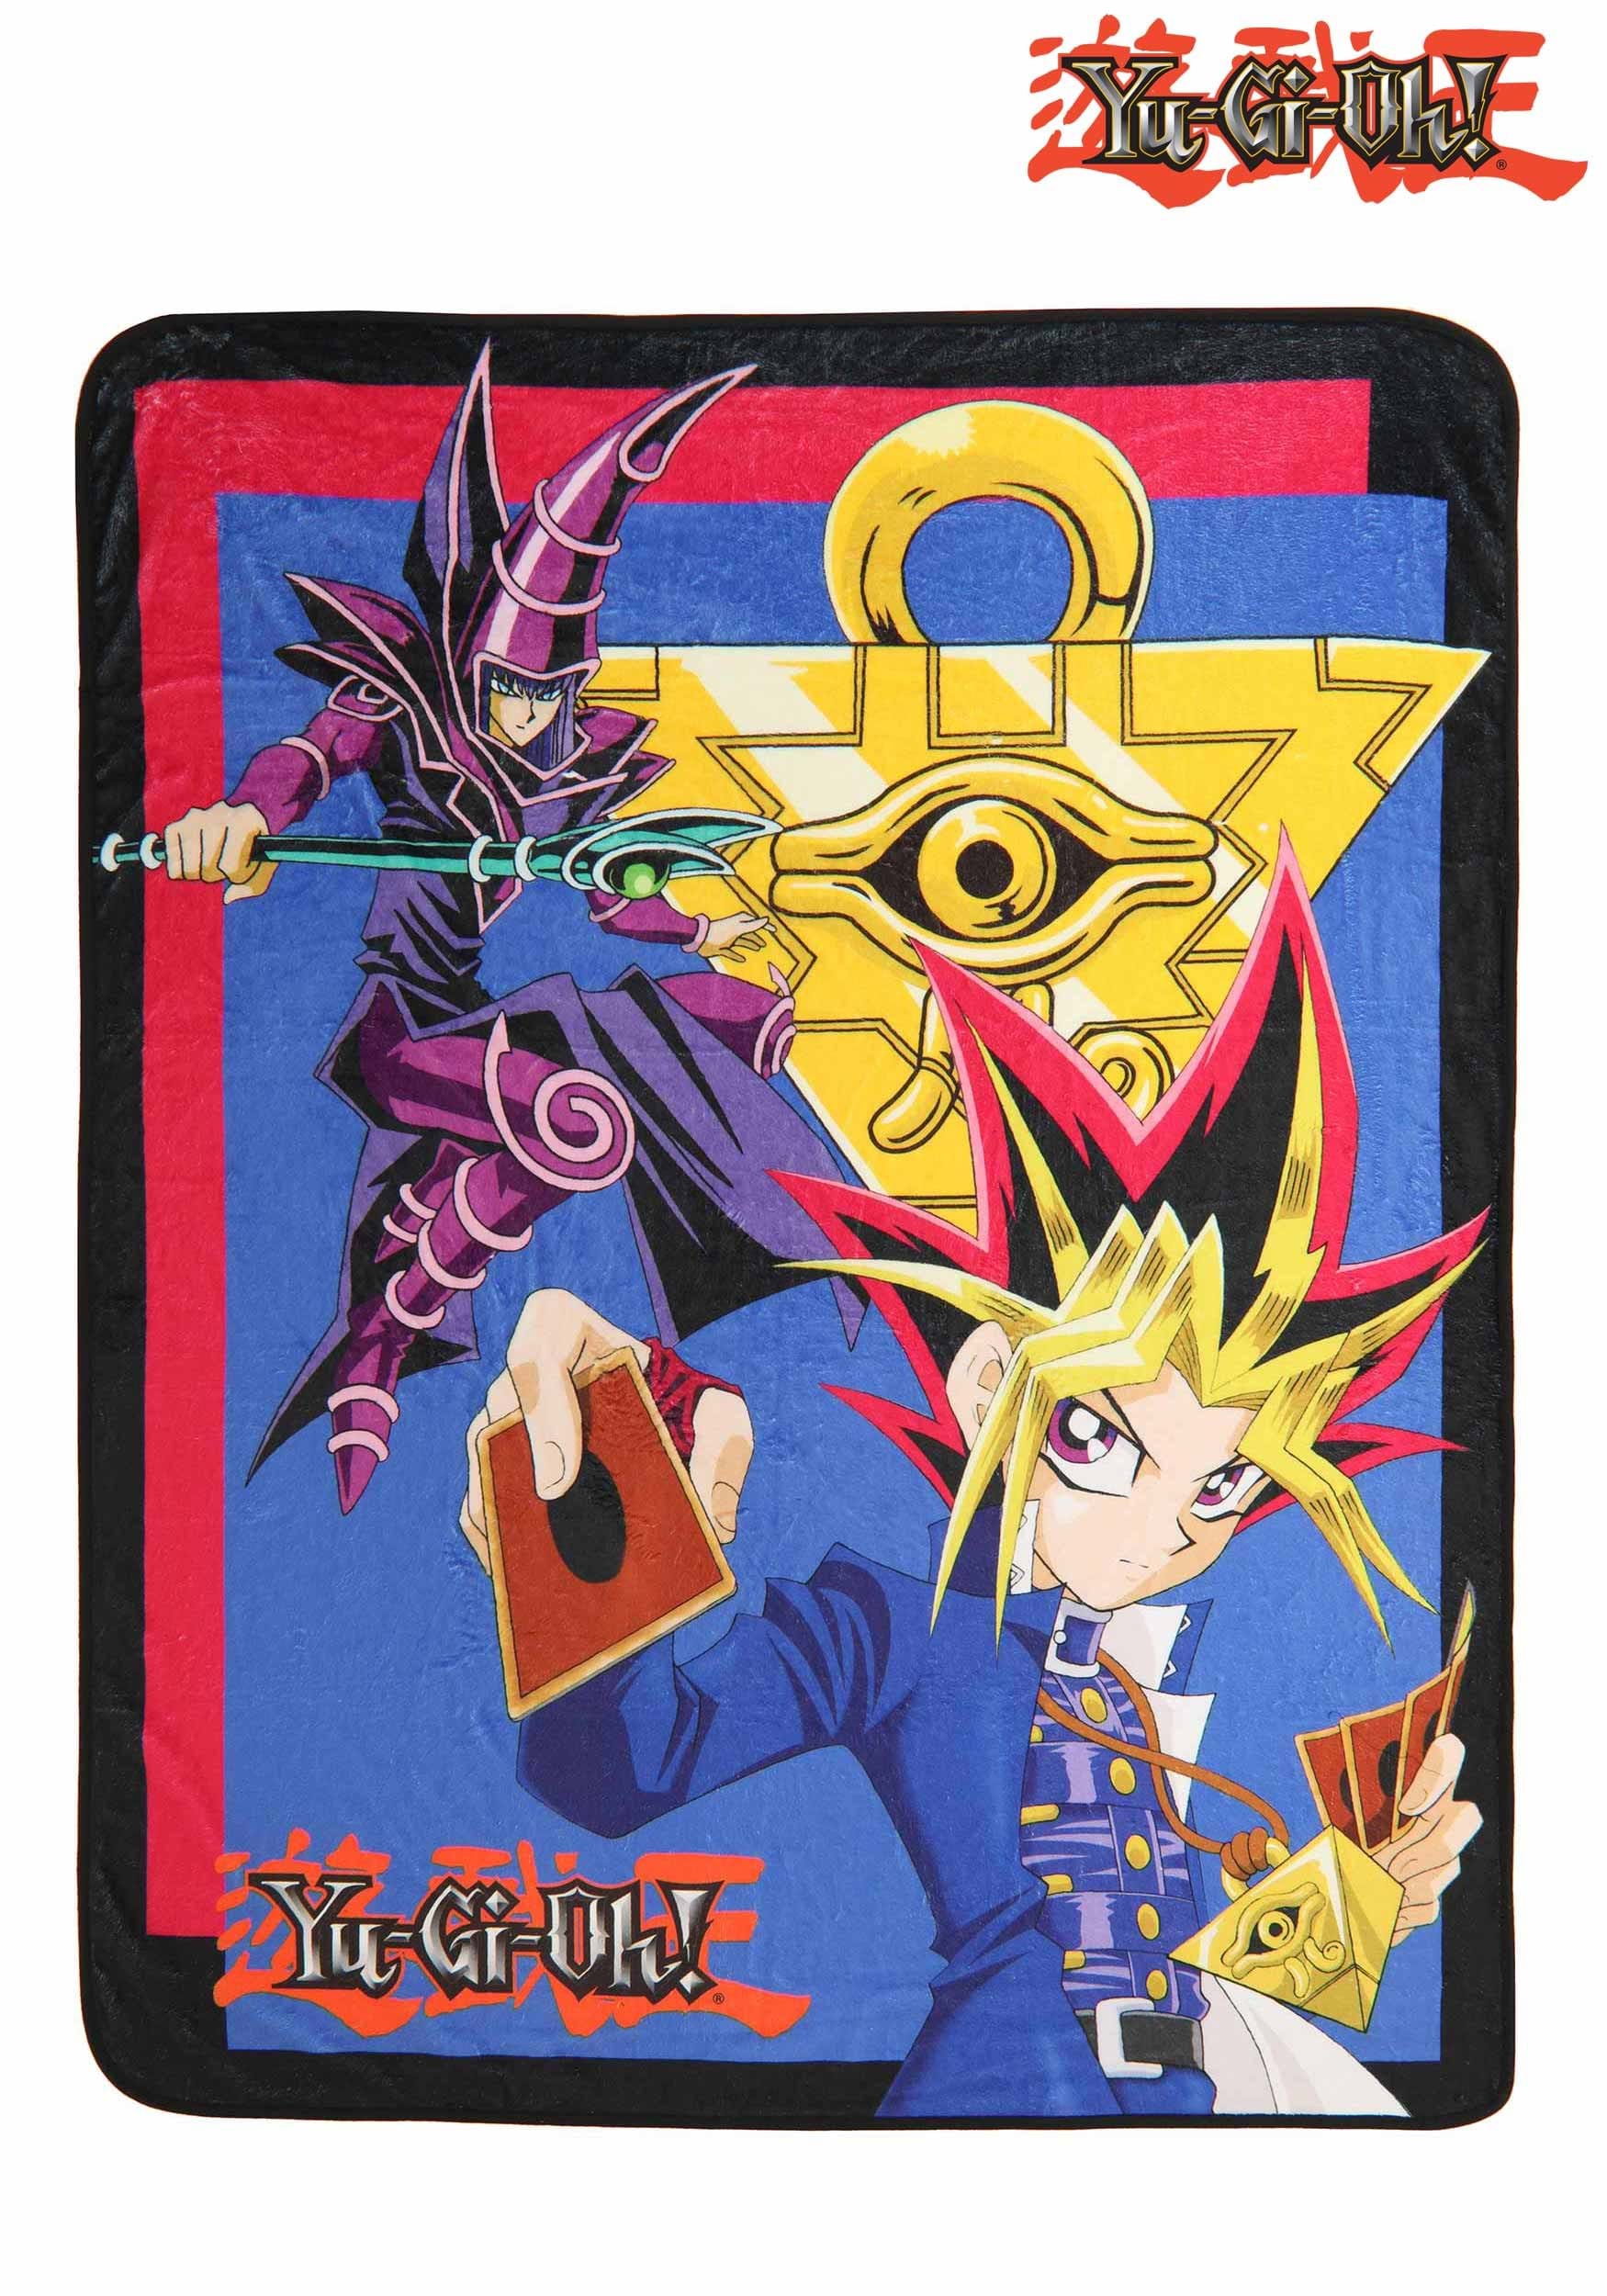 Classic Yu-Gi-Oh! Fans Forever